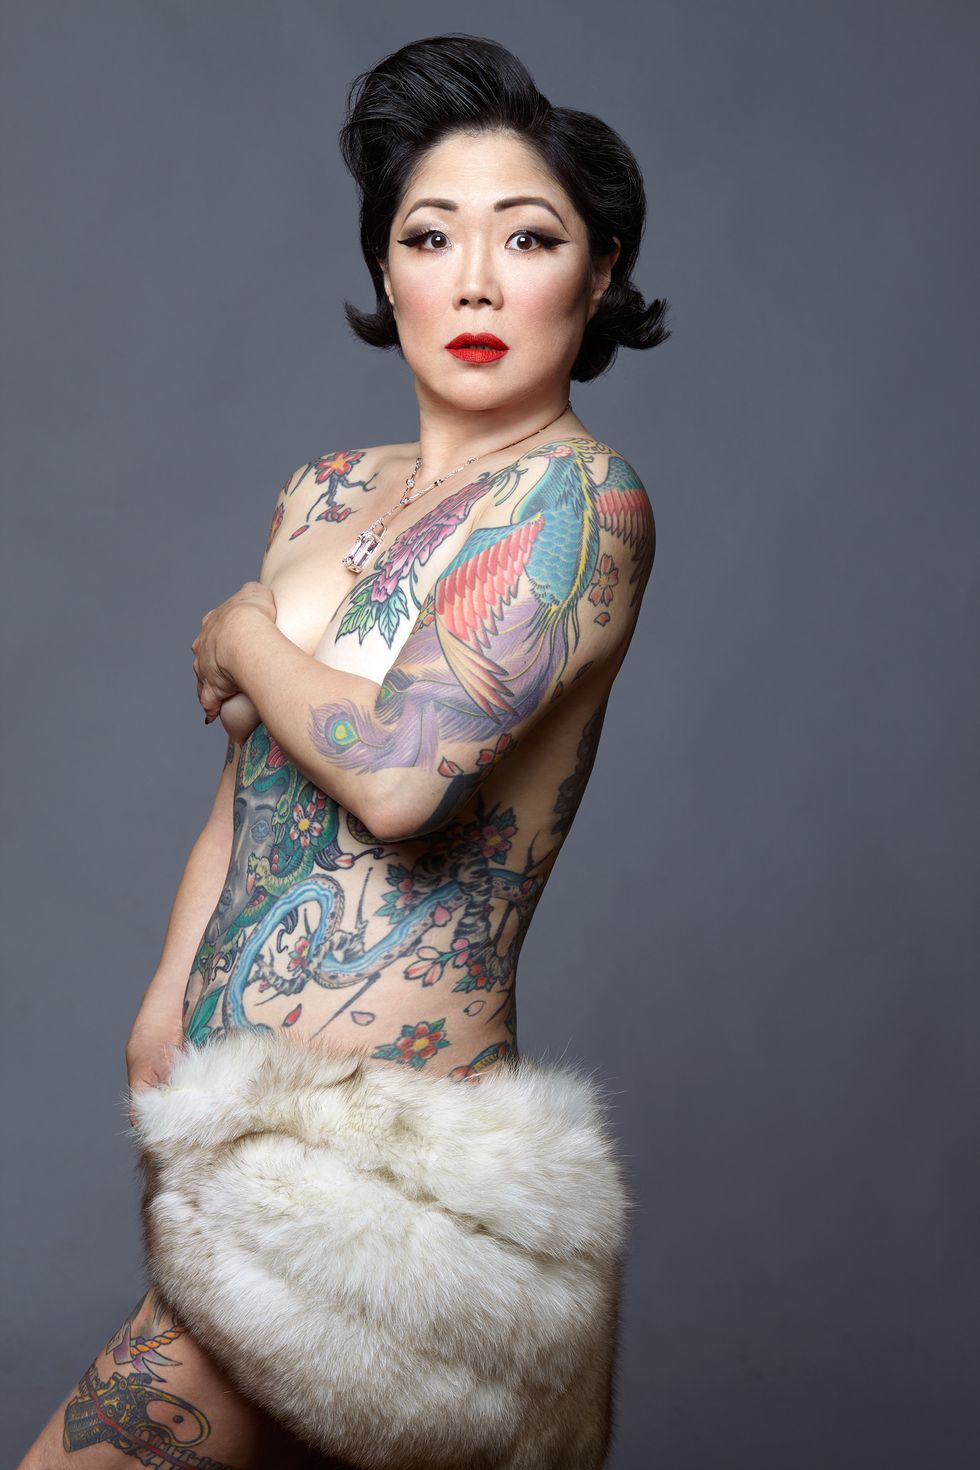 Margaret cho topless